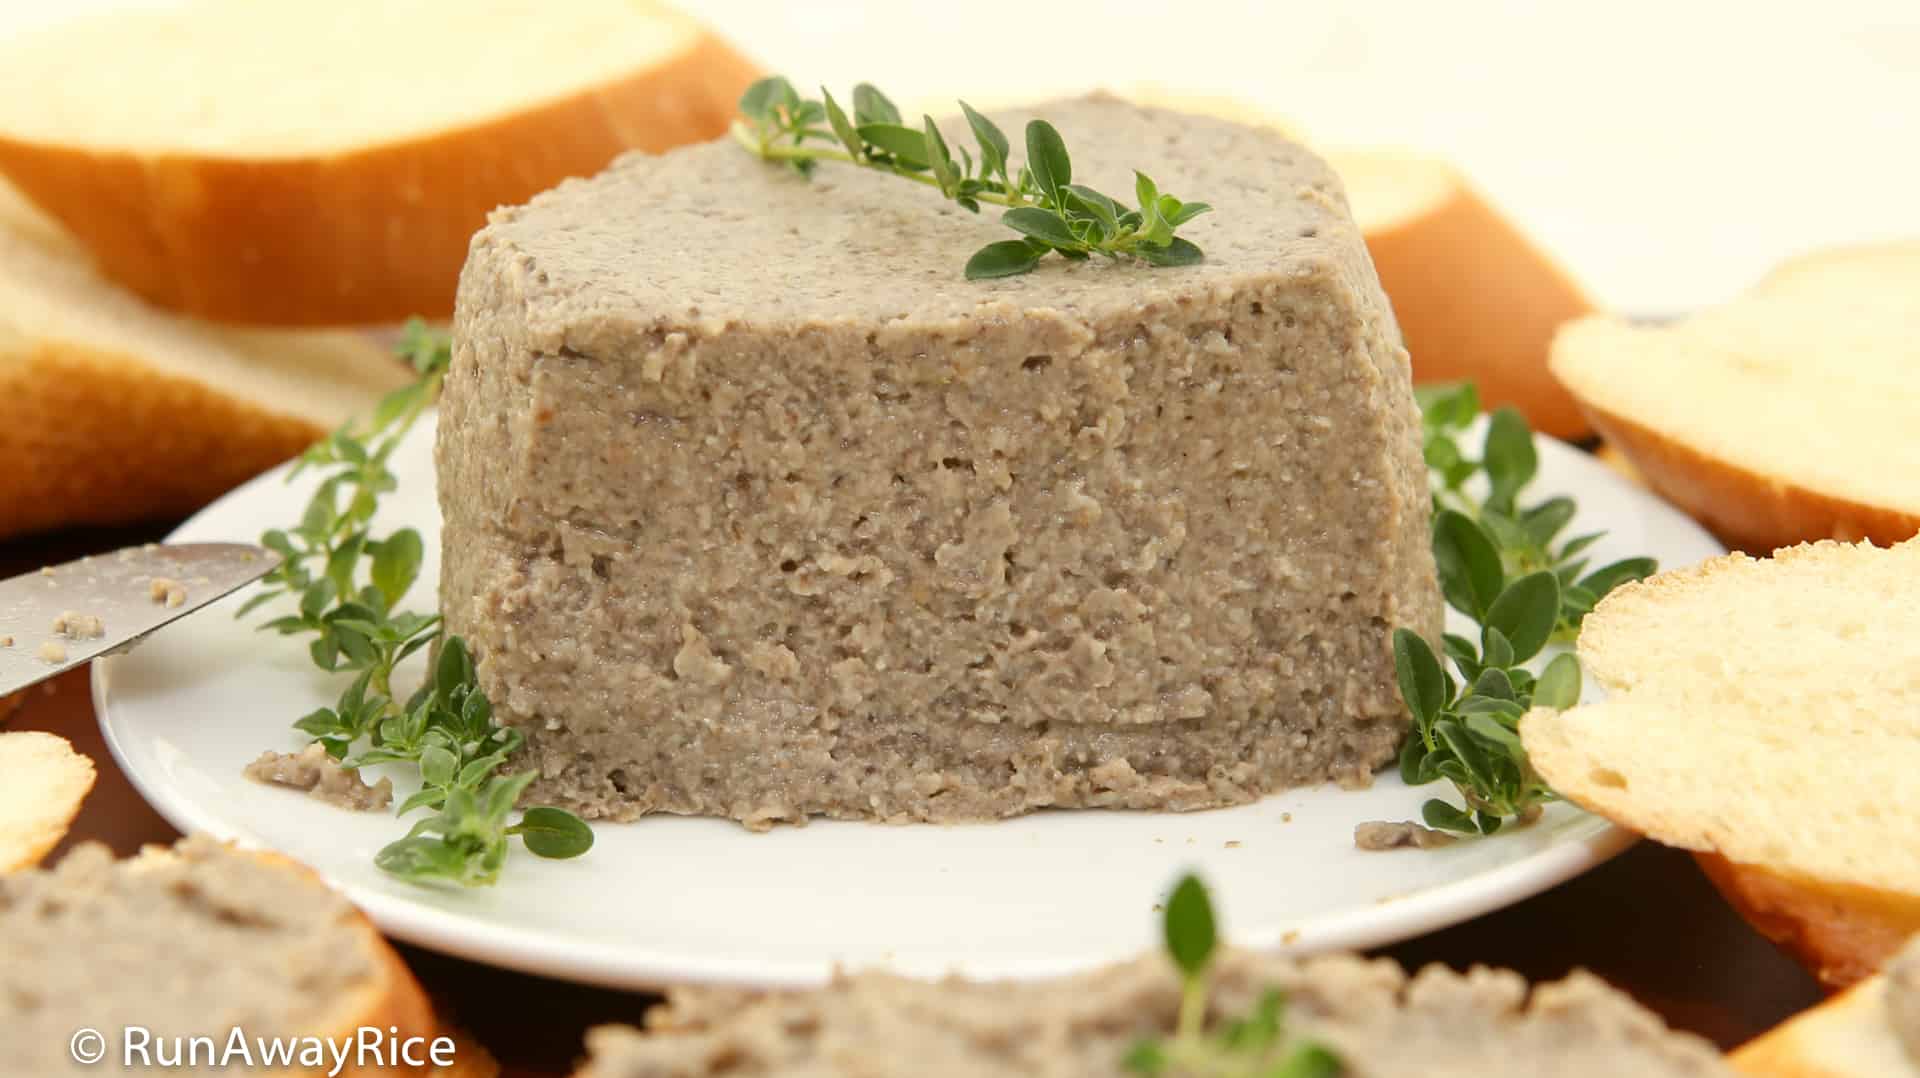 Vegetarian Pate / Faux Gras / Vegan Pate / Pate Chay - delicious meat-free pate served with crusty French bread | recipe from runawayrice.com